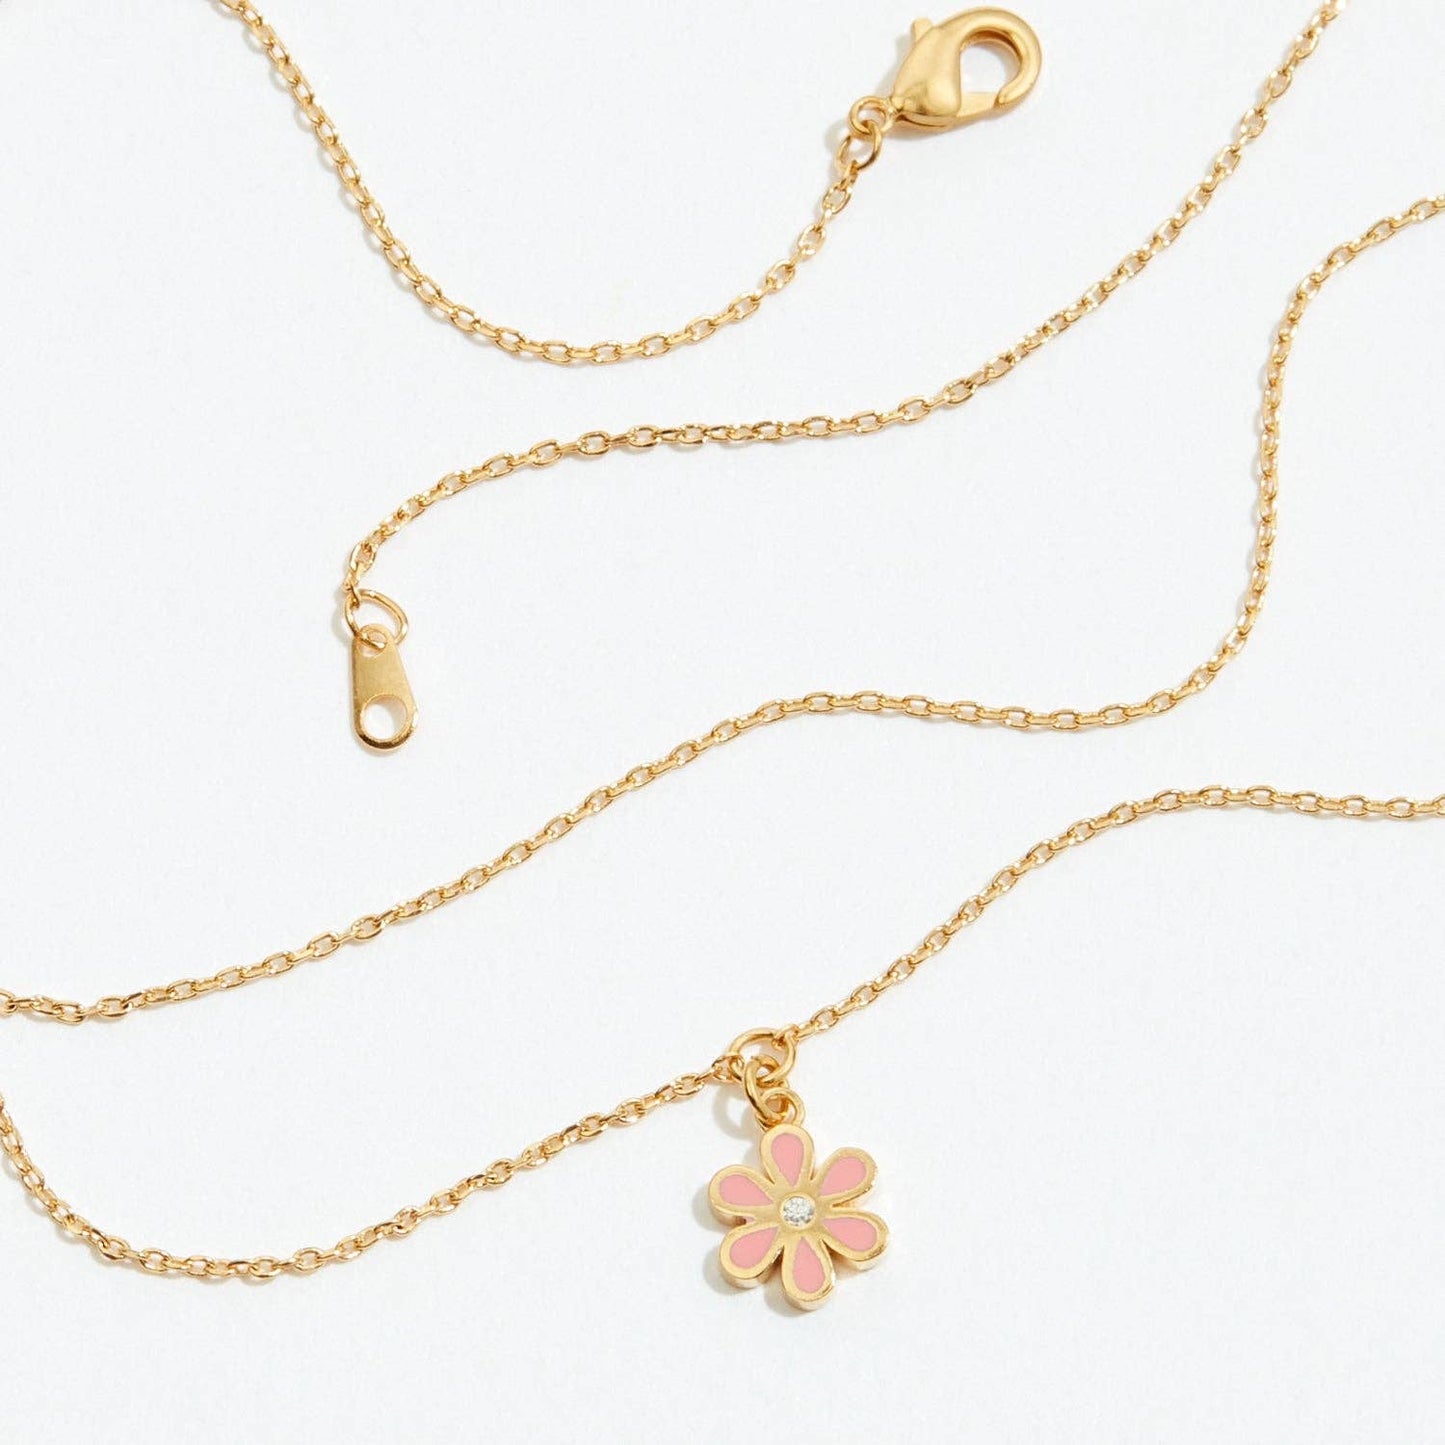 Gold Dipped Dainty Flower Pendant Layered Necklace